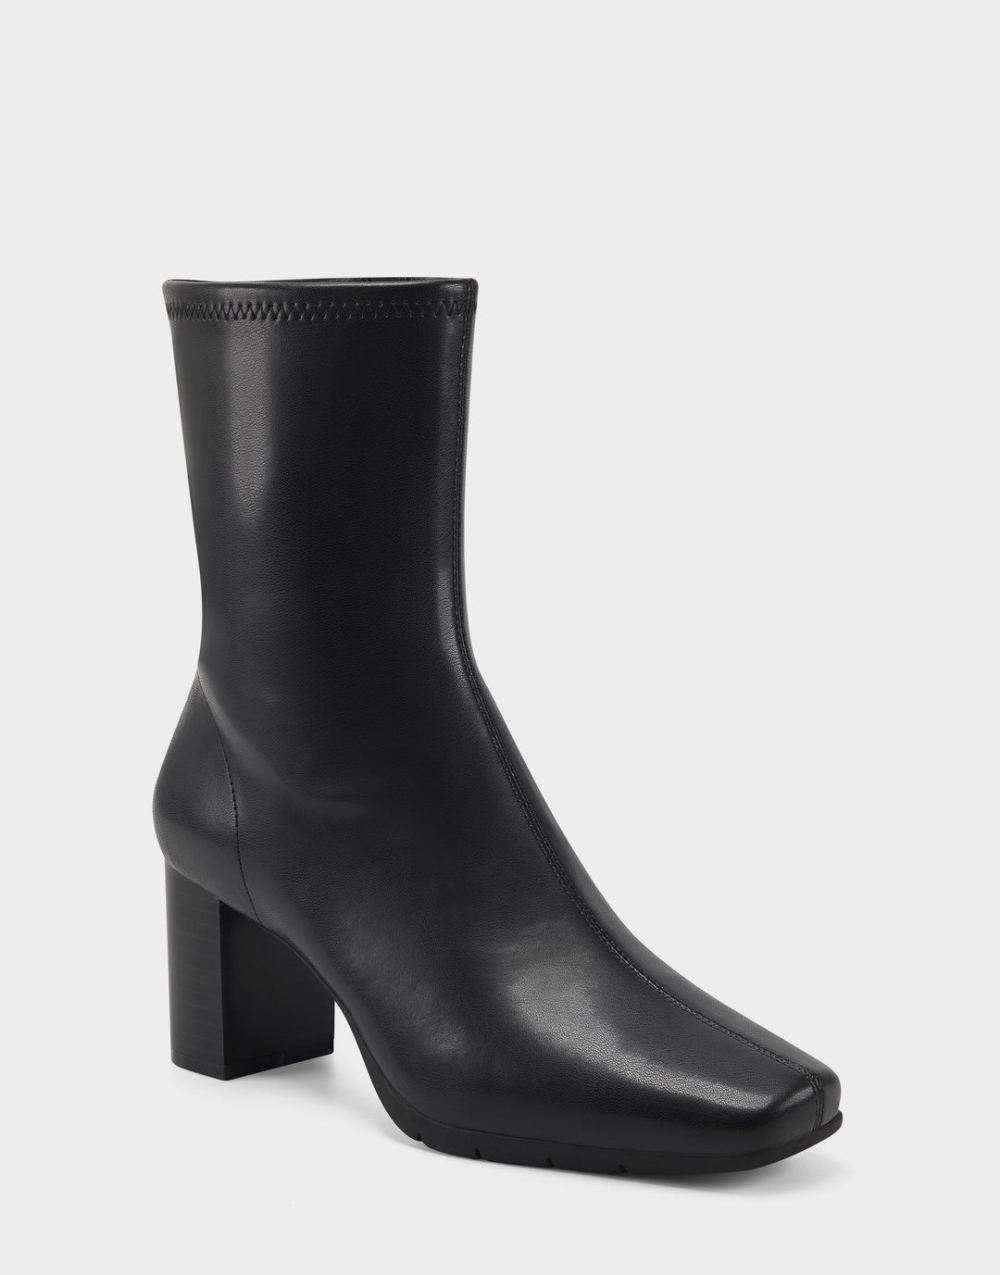 Women's | Black Faux Leather Square Toe Ankle Boot with Zipper Miley